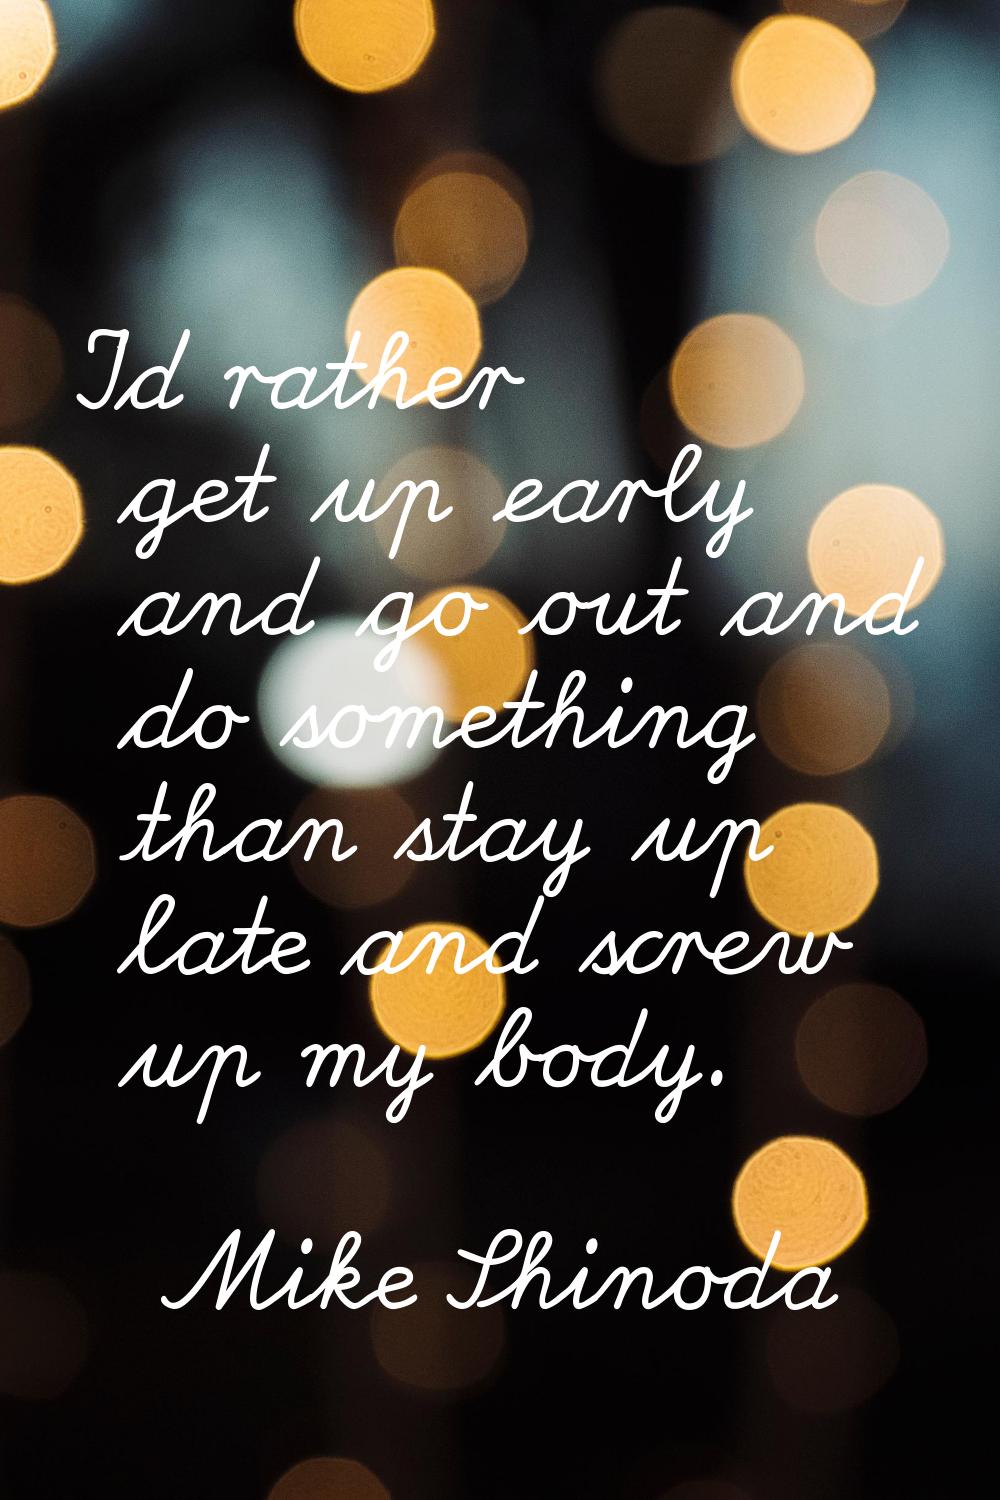 I'd rather get up early and go out and do something than stay up late and screw up my body.